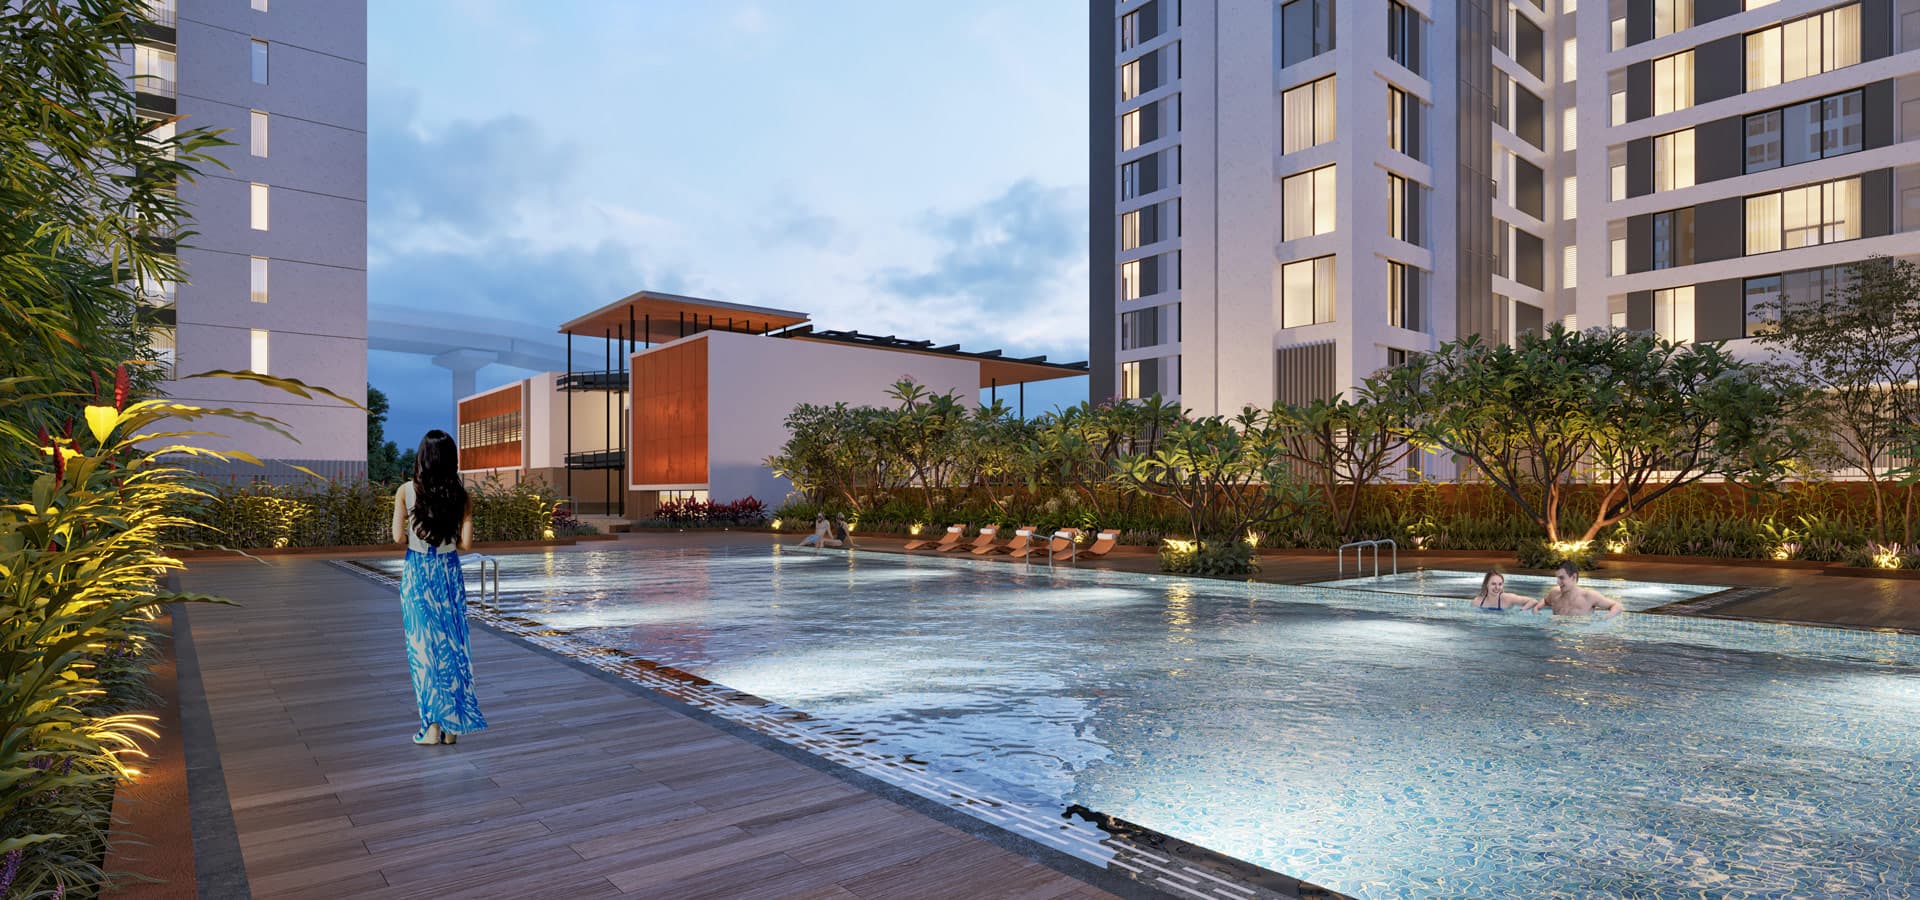 Swimming pool at Piramal Vaikunth for relaxation and fitness